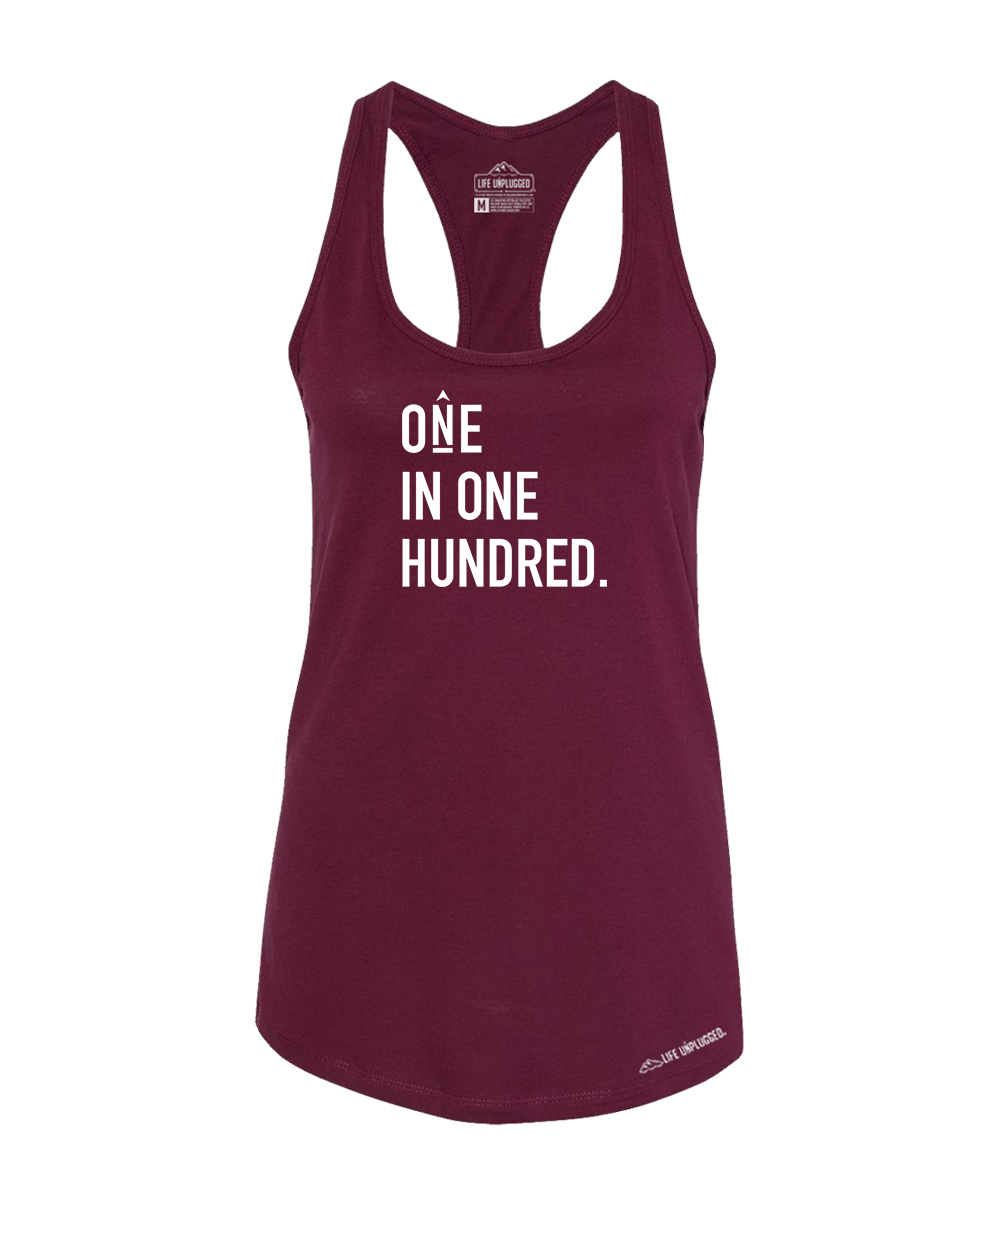 One in One Hundred Stacked Premium Women's Relaxed Fit Racerback Tank Top - Life Unplugged